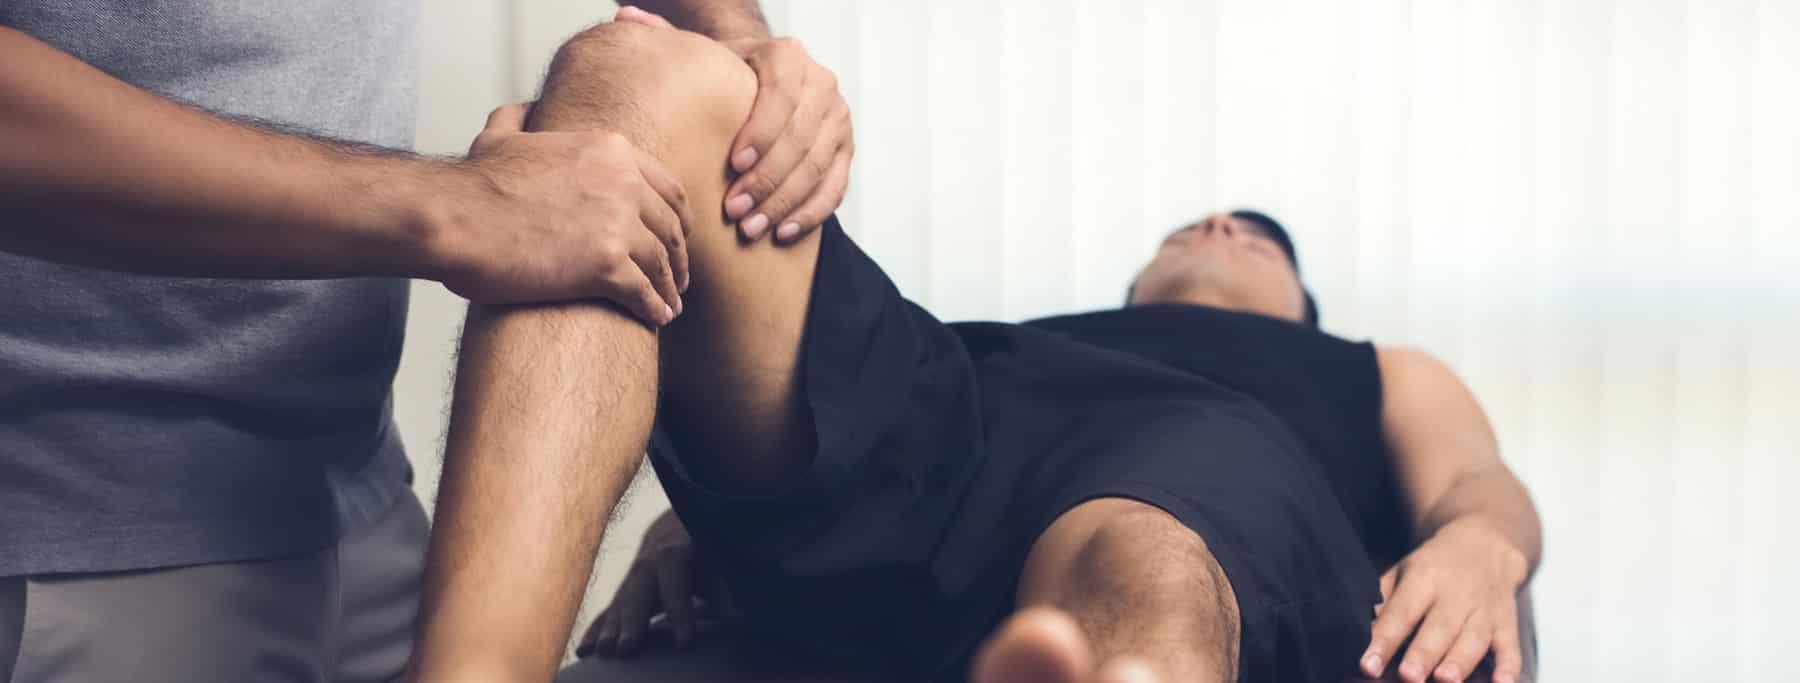 therapist treating injured knee of athlete male patient